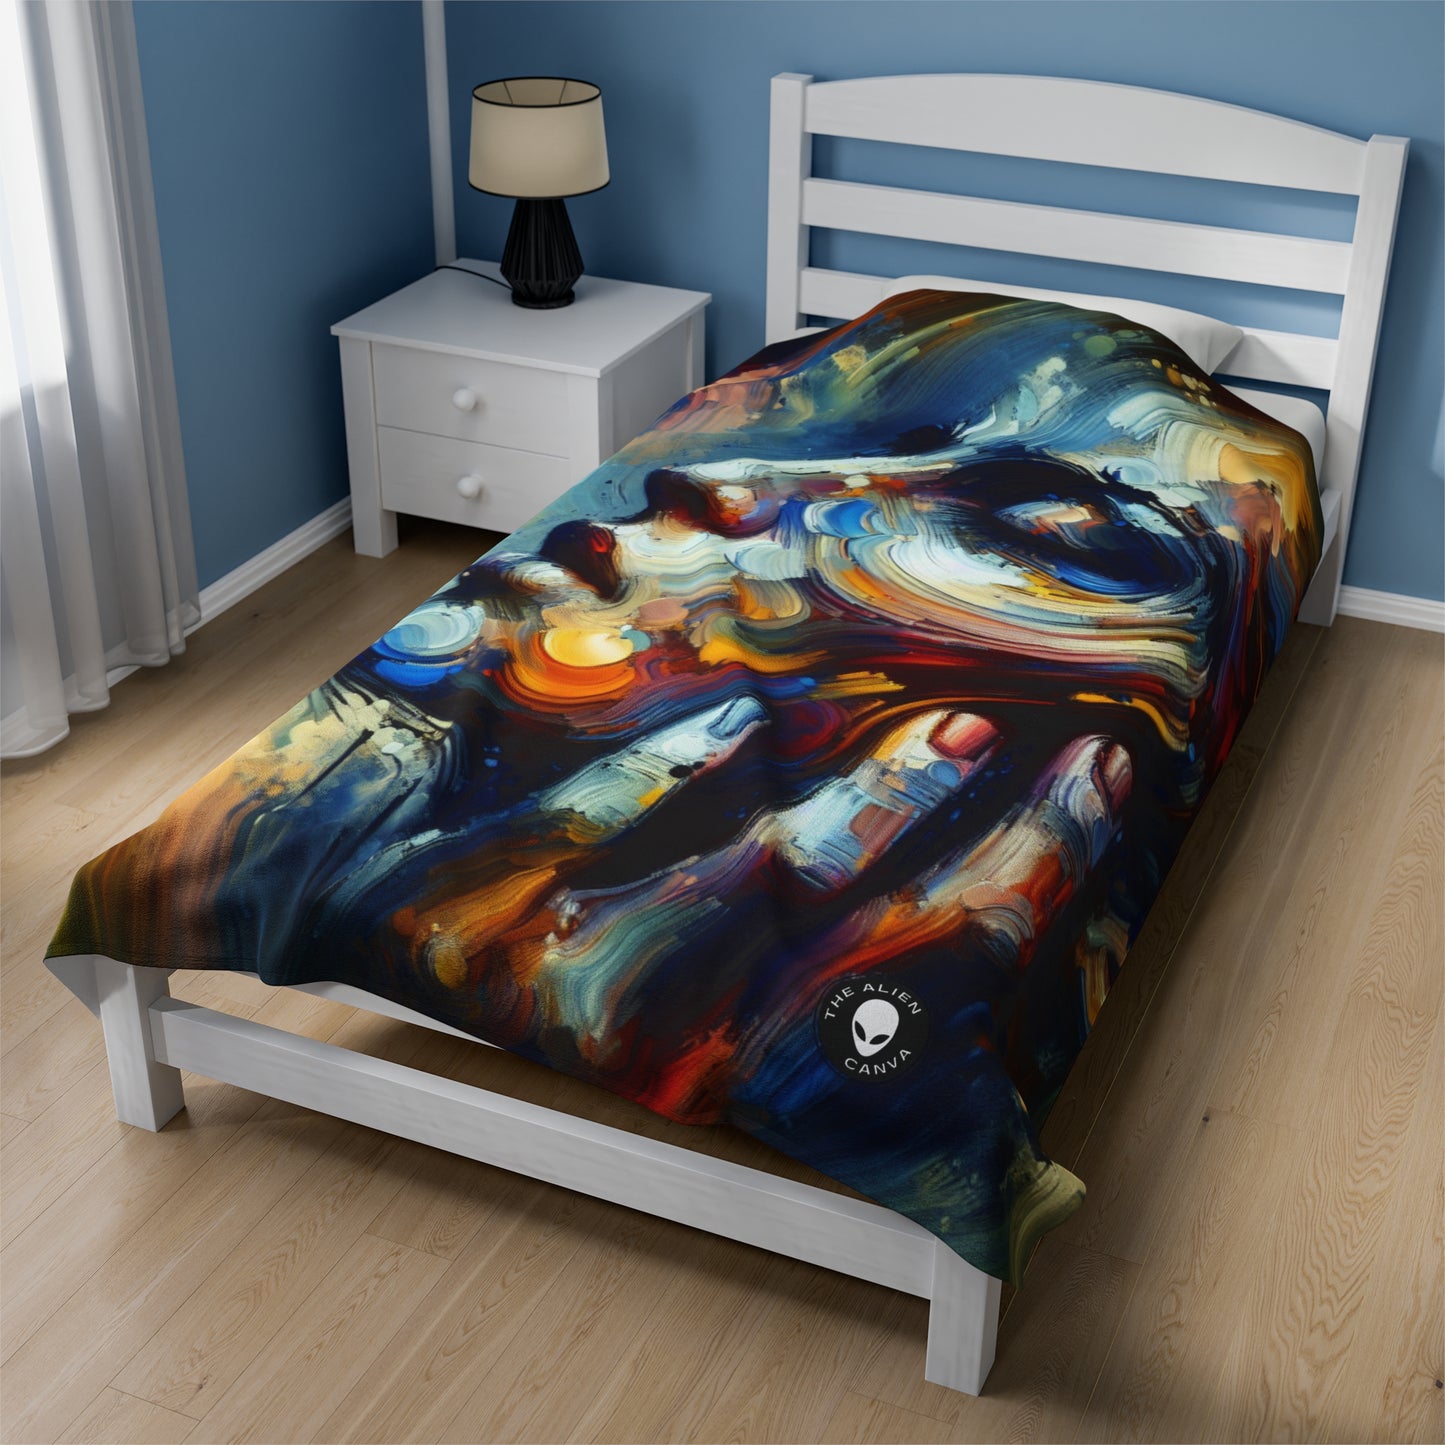 "City Lights: A Neo-Expressionist Ode to Urban Chaos" - The Alien Velveteen Plush Blanket Neo-Expressionism